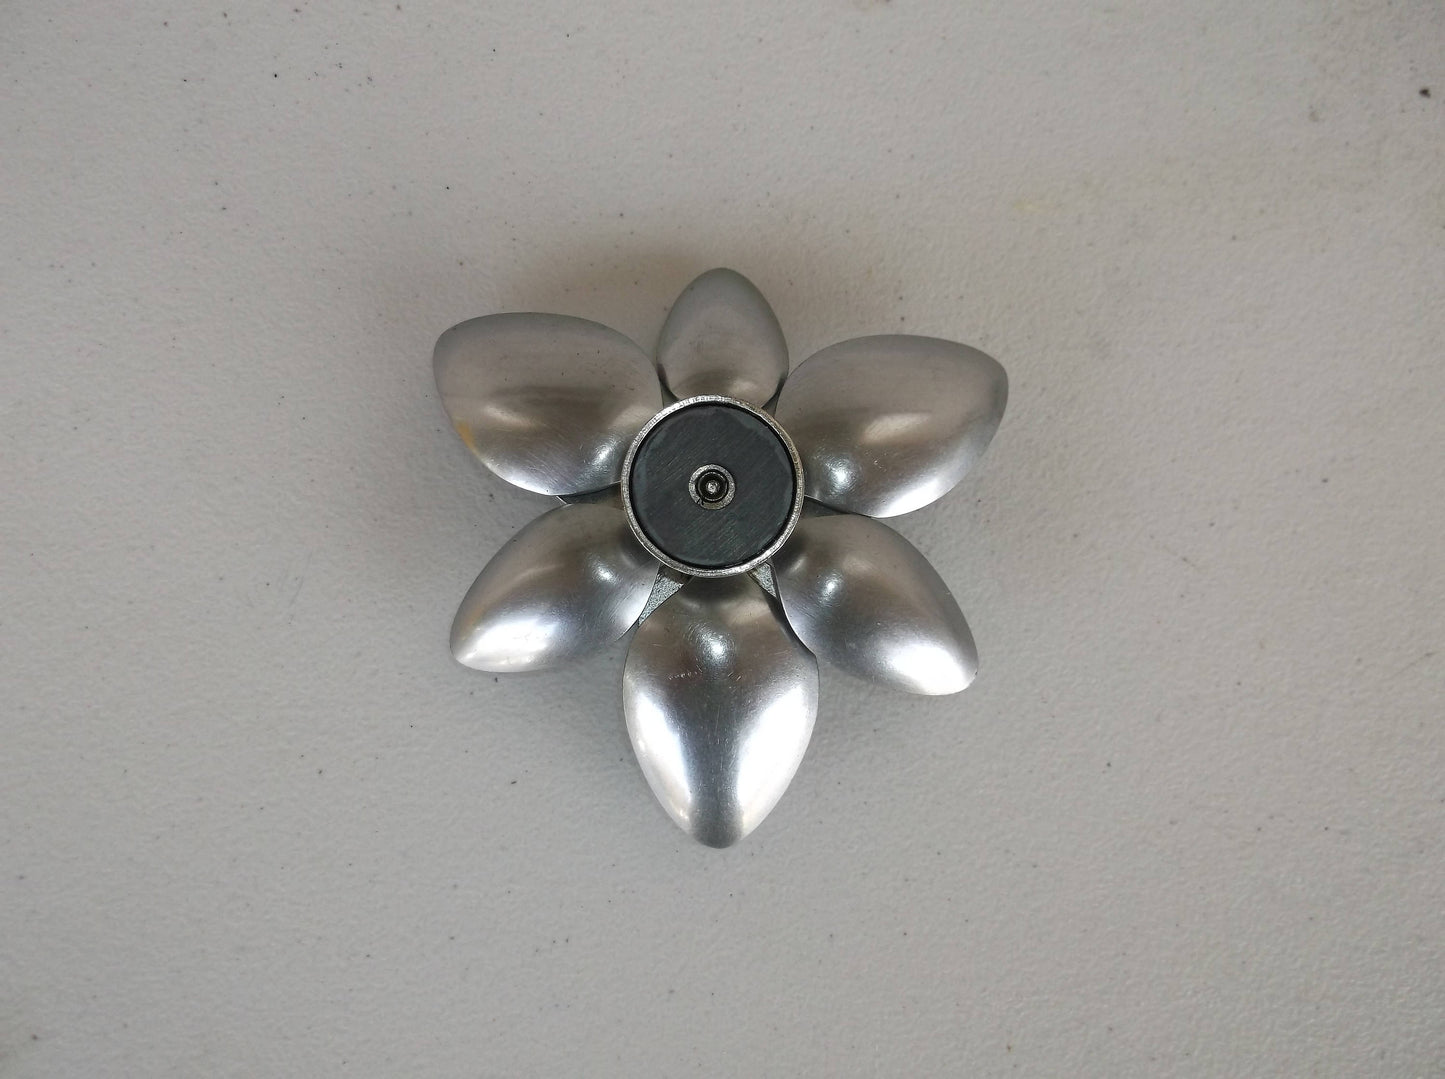 Yellow Spoon Flower Magnet, Recycled Welded Metal Arts and Crafts